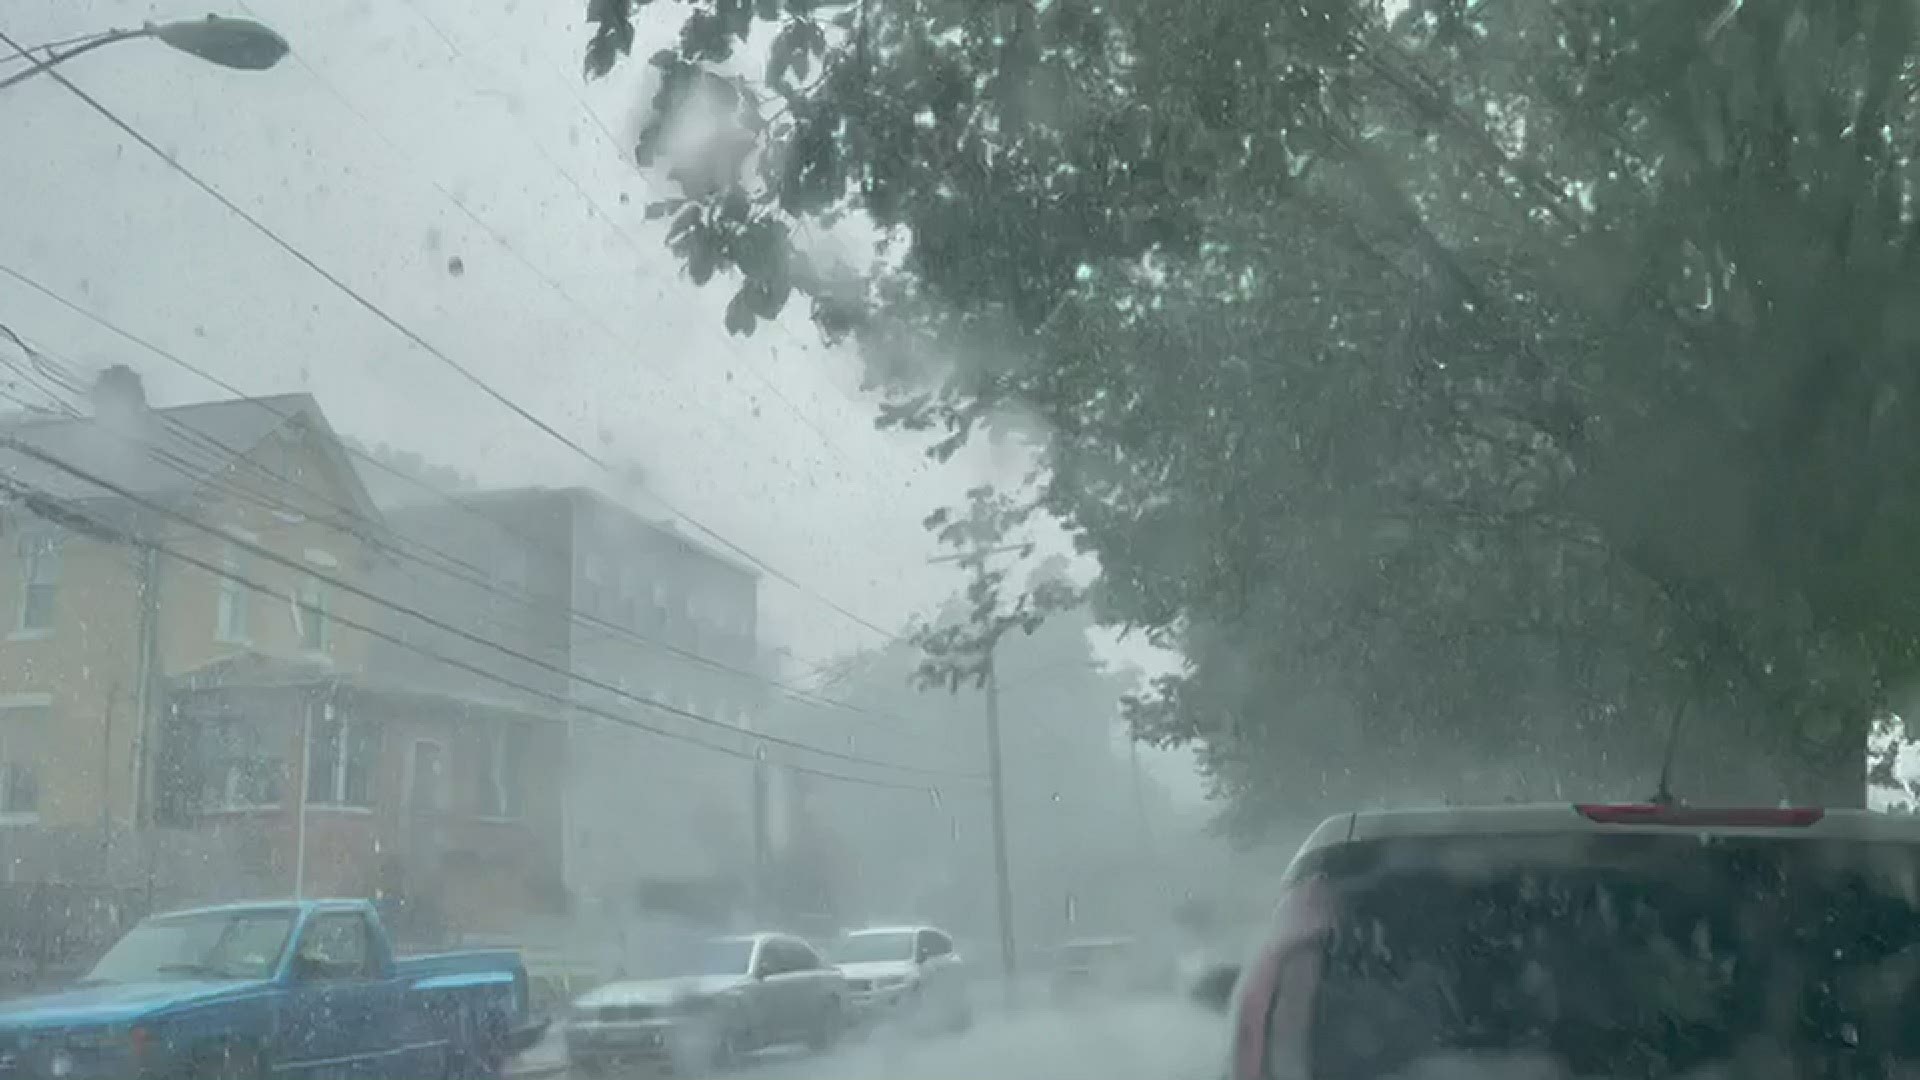 Heavy rain and hail falls in SE DC near the intersection of 4th St and Valley Ave.